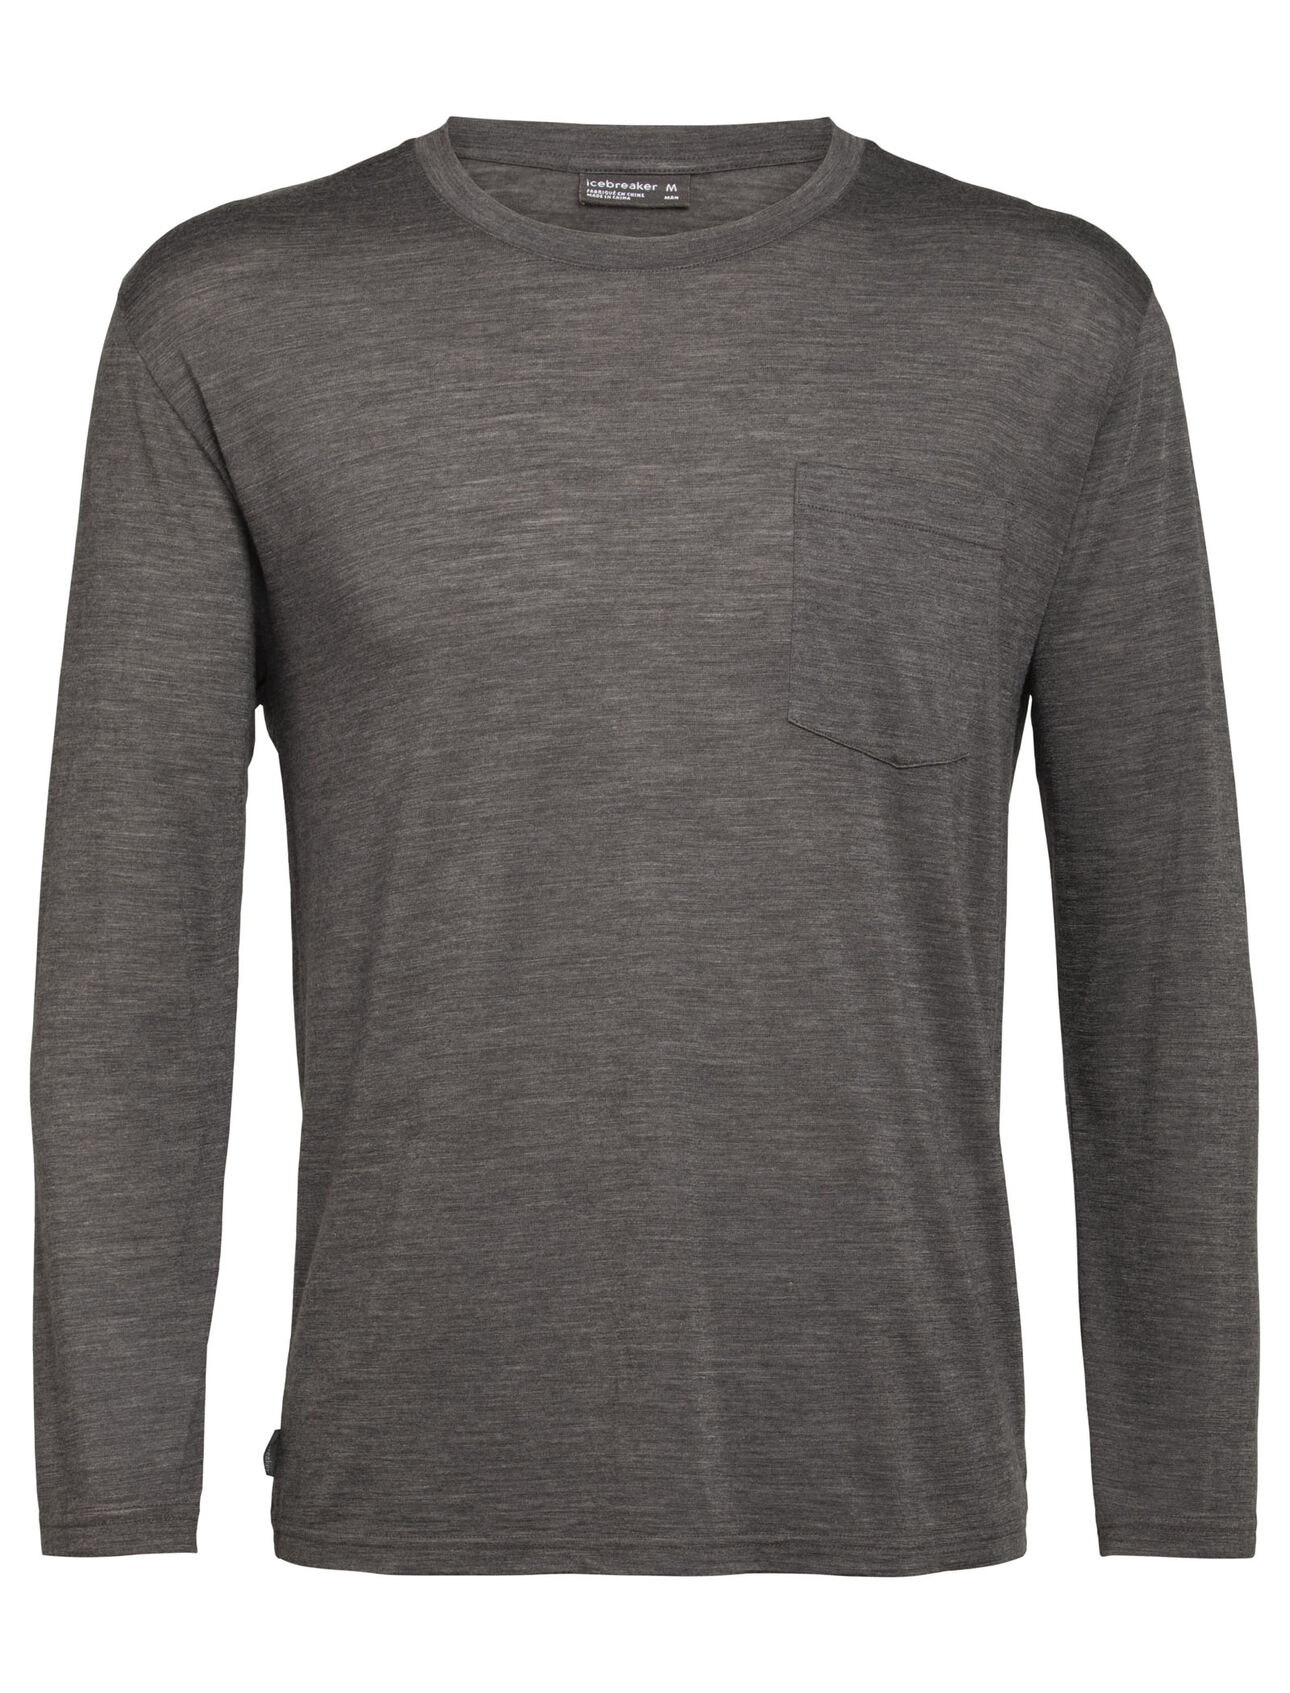 Mens Nature Dye Merino Drayden Long Sleeve Pocket Crewe T-Shirt Featuring our highly breathable Cool-Lite™ fabric and dyed using natural, sustainably sourced plant pigments, the Nature Dye Drayden Long Sleeve Pocket Crewe is a casual yet conscious everyday T-shirt. 